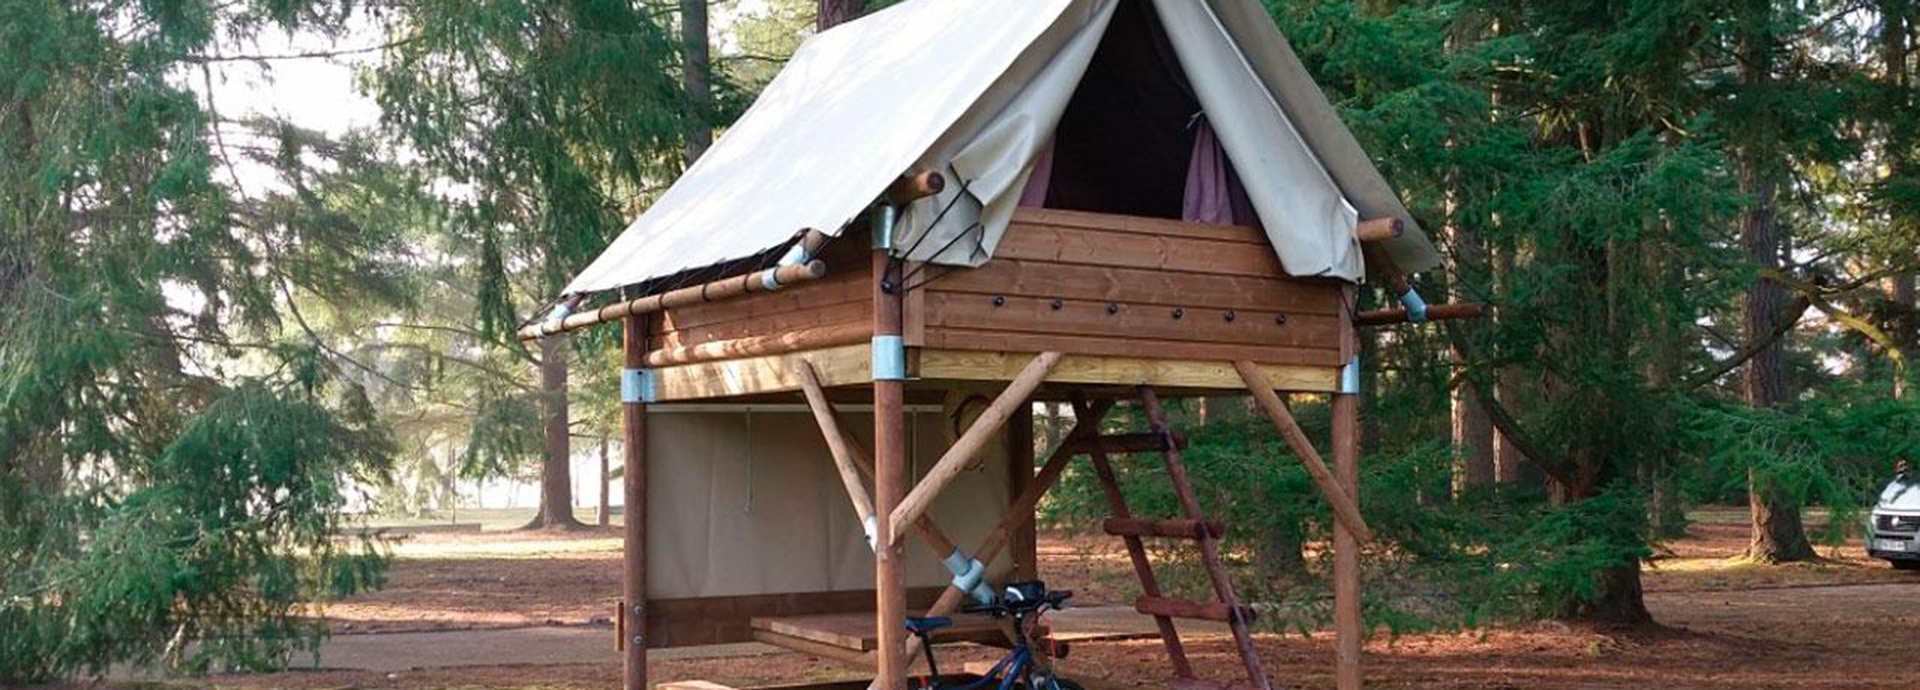 Rental of a bivouac on stilts at the 3 star Campsite Les Acacias in Altkirch, Alsace